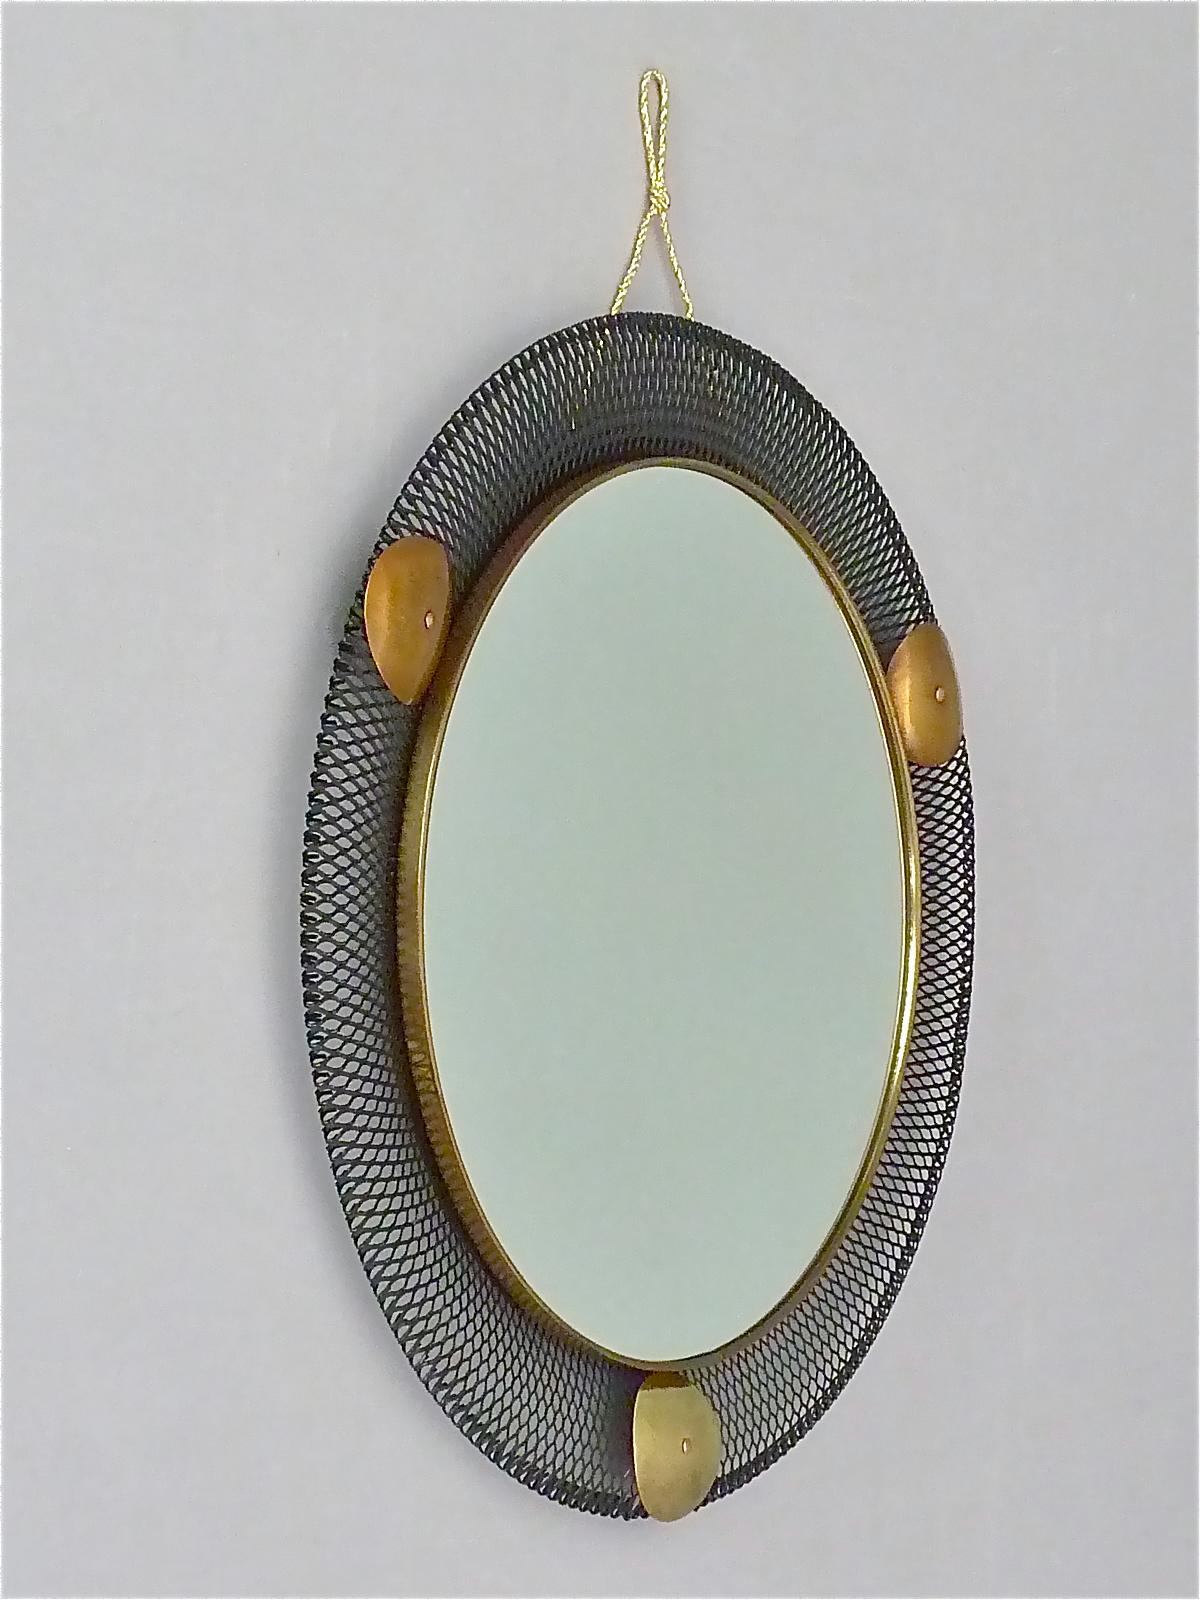 Round Black Midcentury Wall Mirror Brass Stretched Metal 1955 Mategot Biny Style For Sale 2